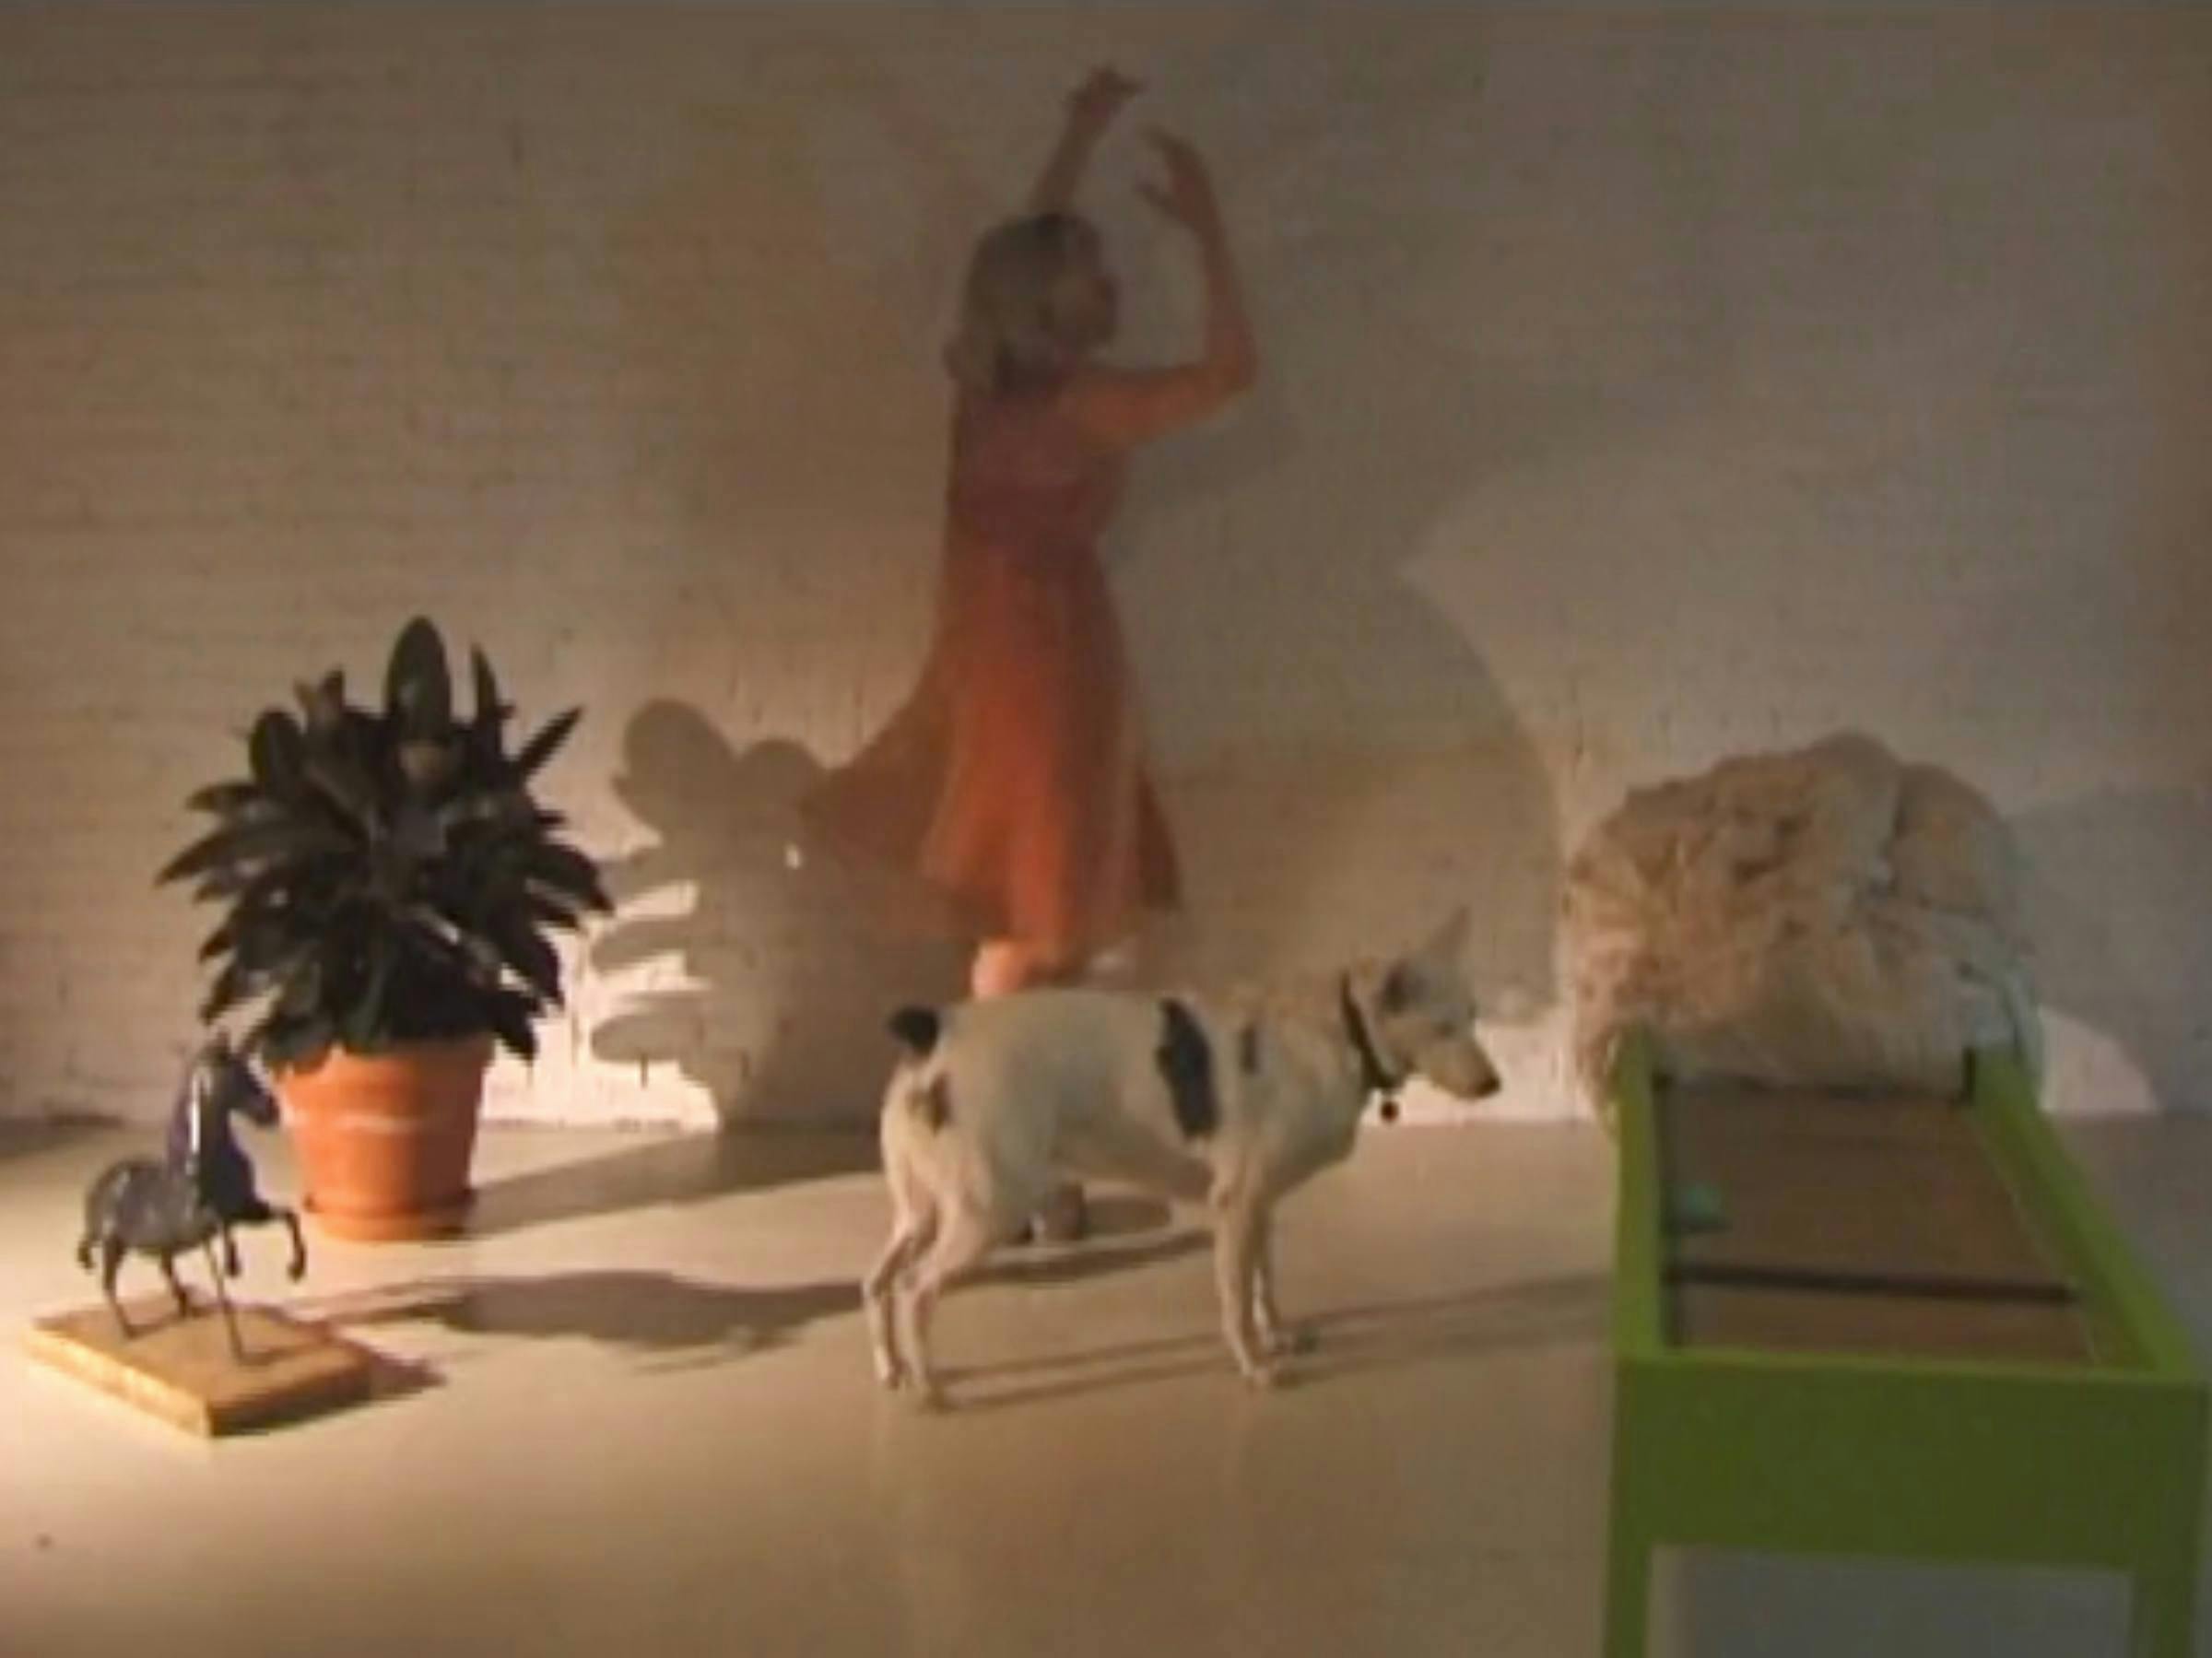 the artist is dancing in a white room. She is wearing an orange dress. There is a dog in front of her, a plant behind her and a green bed to her right. We can also see a statue of a horse in the foreground